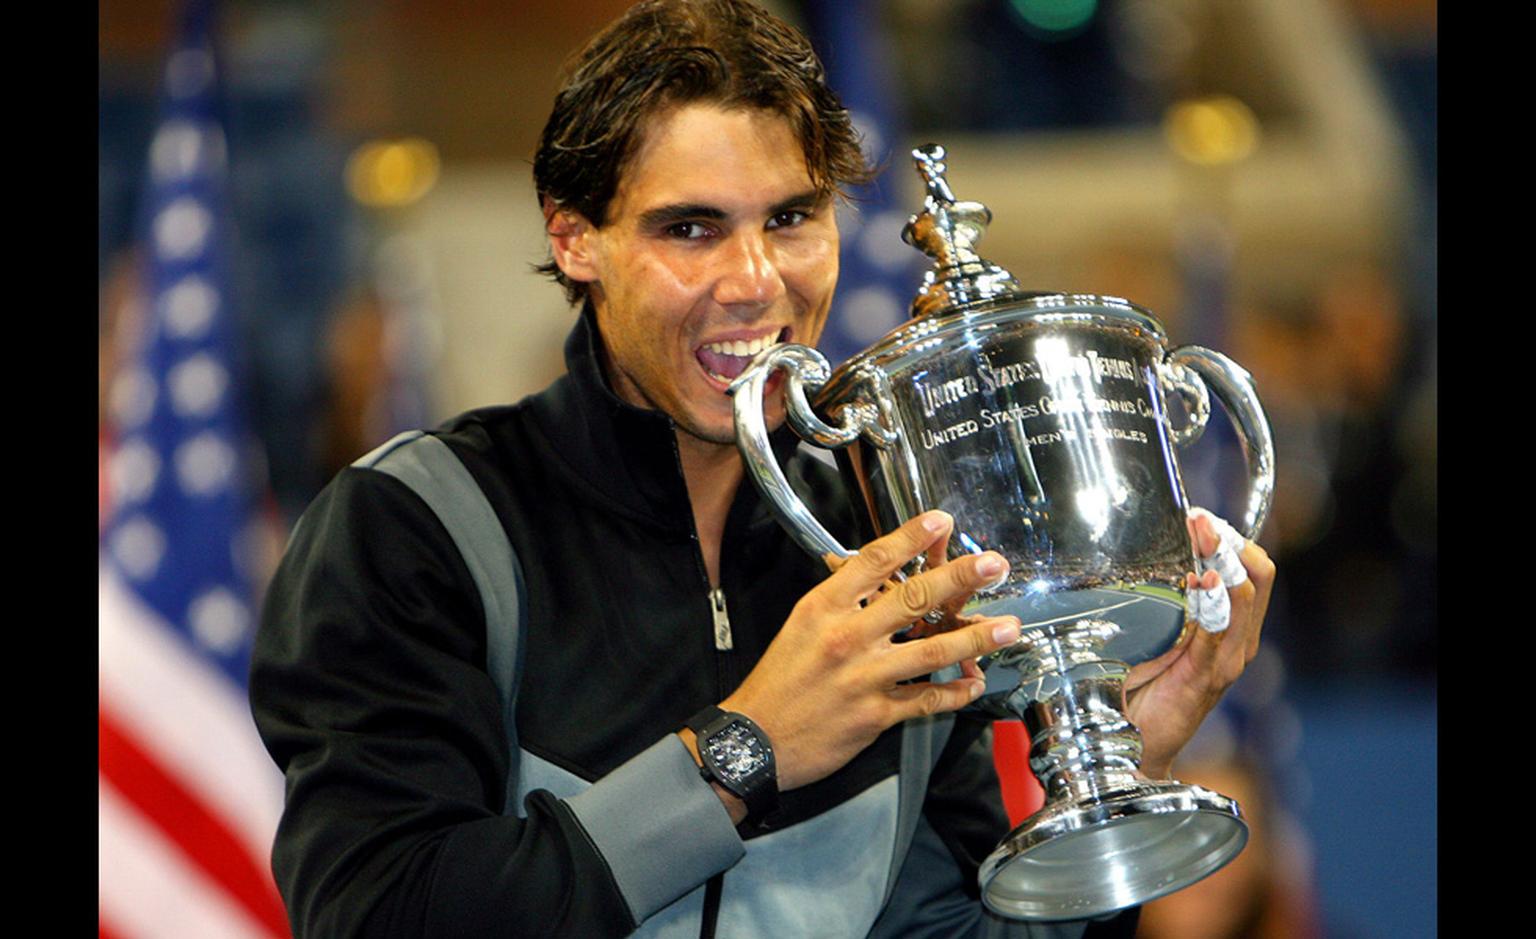 Is this Rafa's lucky watch? With the Richard Mille RM 027 Tourbillon after winning the US Open in Sept 2010